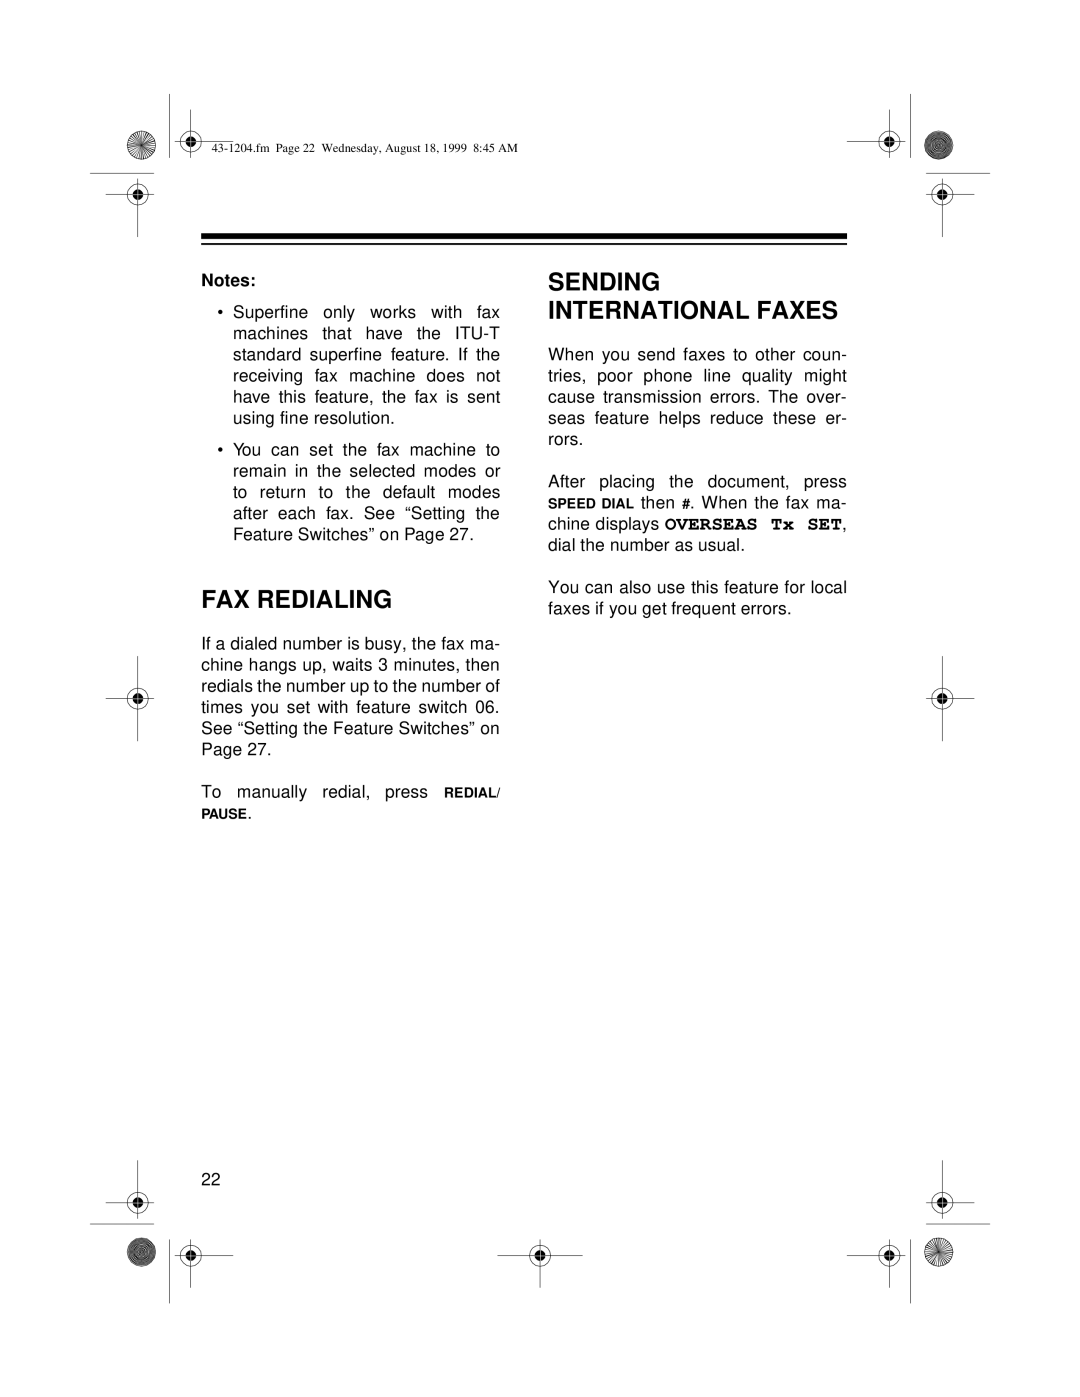 Radio Shack 43-1204 owner manual Fax Redialing, Sending International Faxes, To manually redial, press REDIAL/ PAUSE 